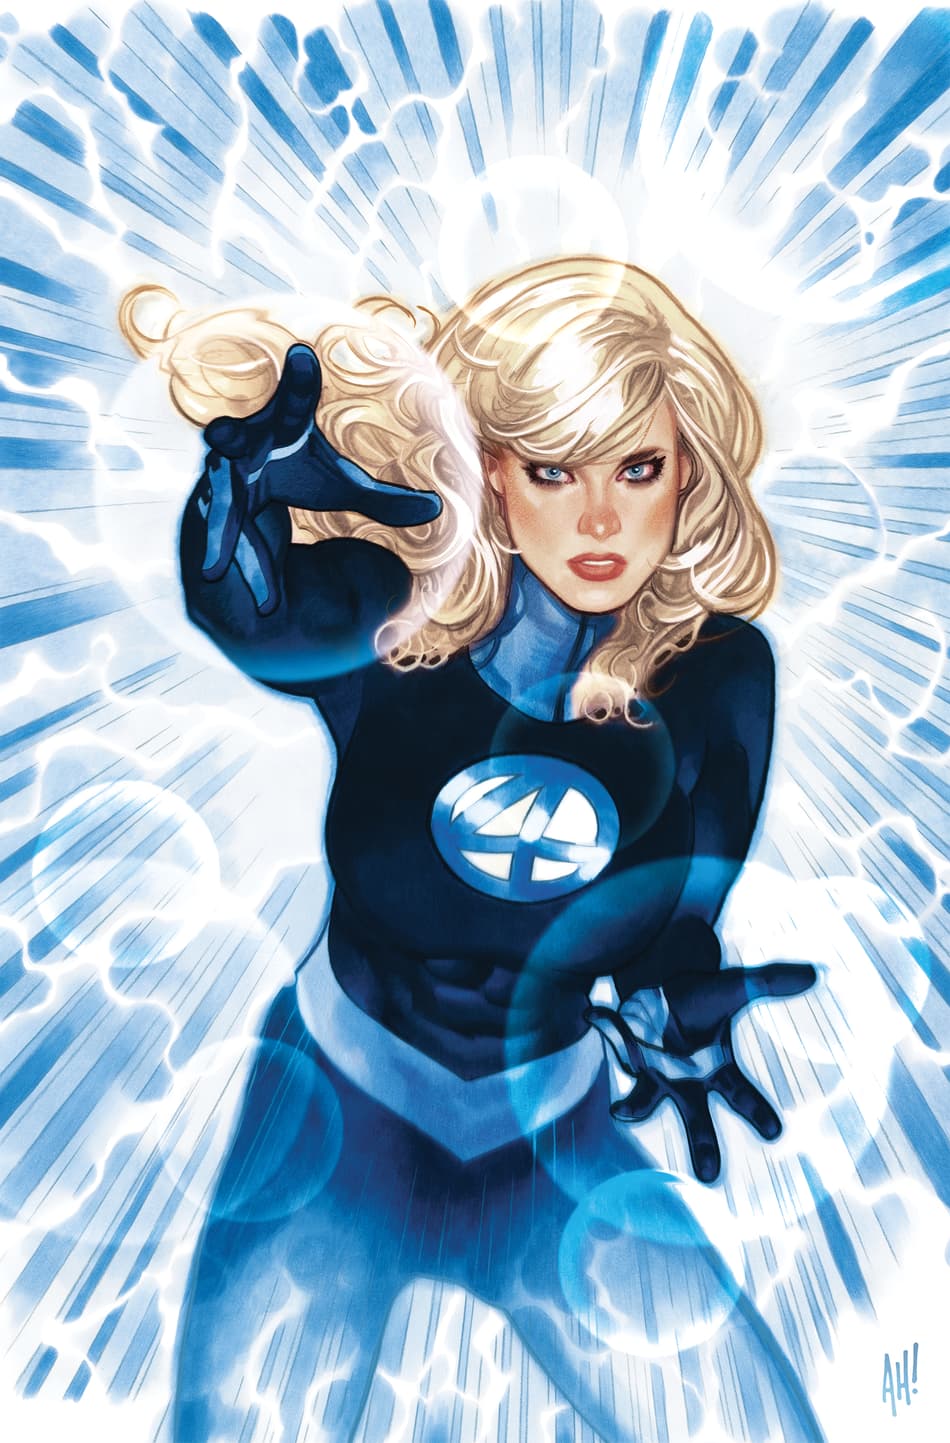 Showing off her incredible powers on the cover of INVISIBLE WOMAN (2019) #1.